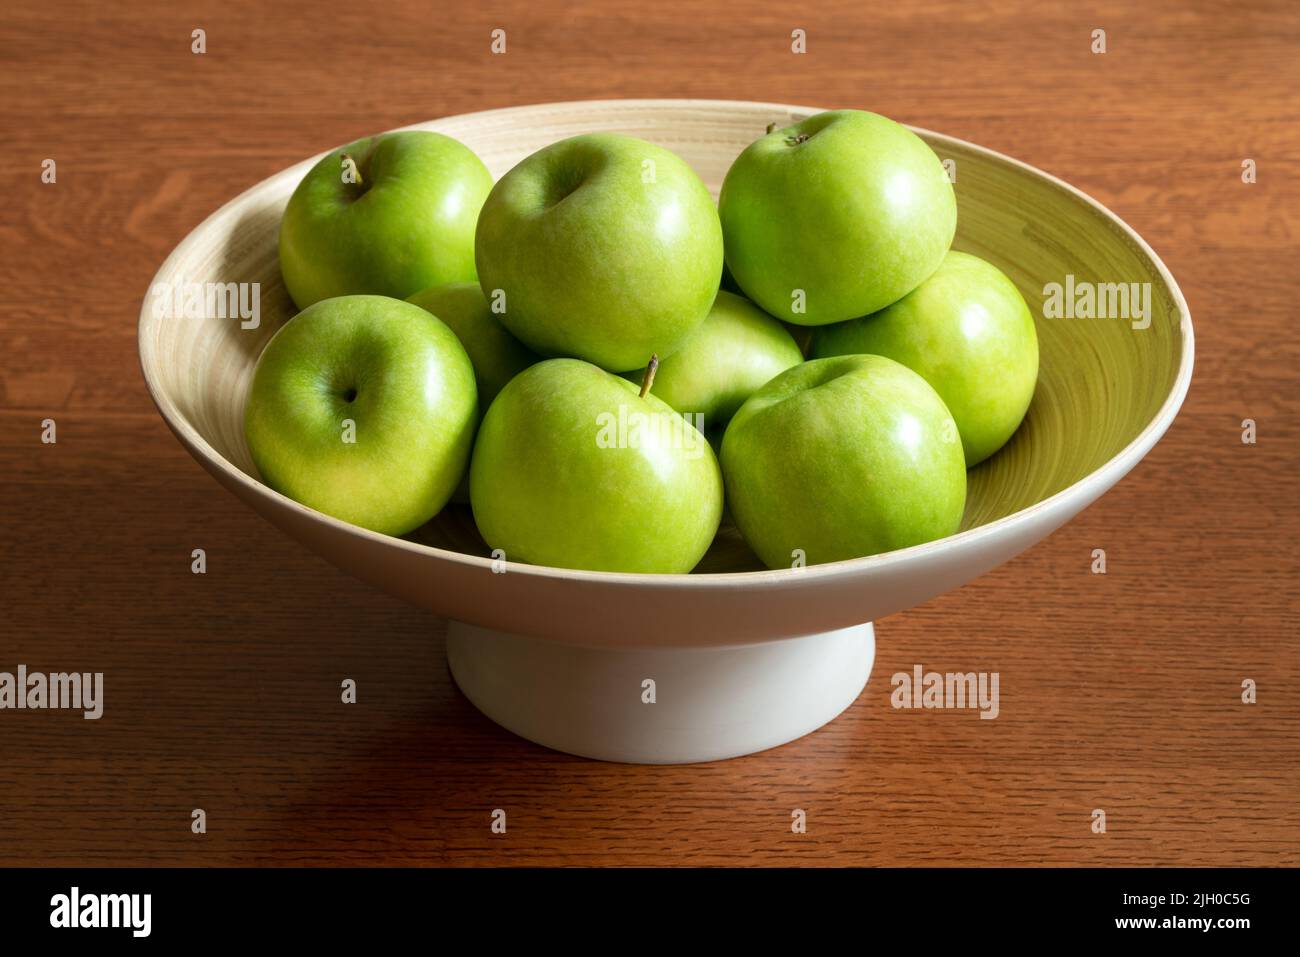 Green Apples in a Bamboo Bowl Stock Photo